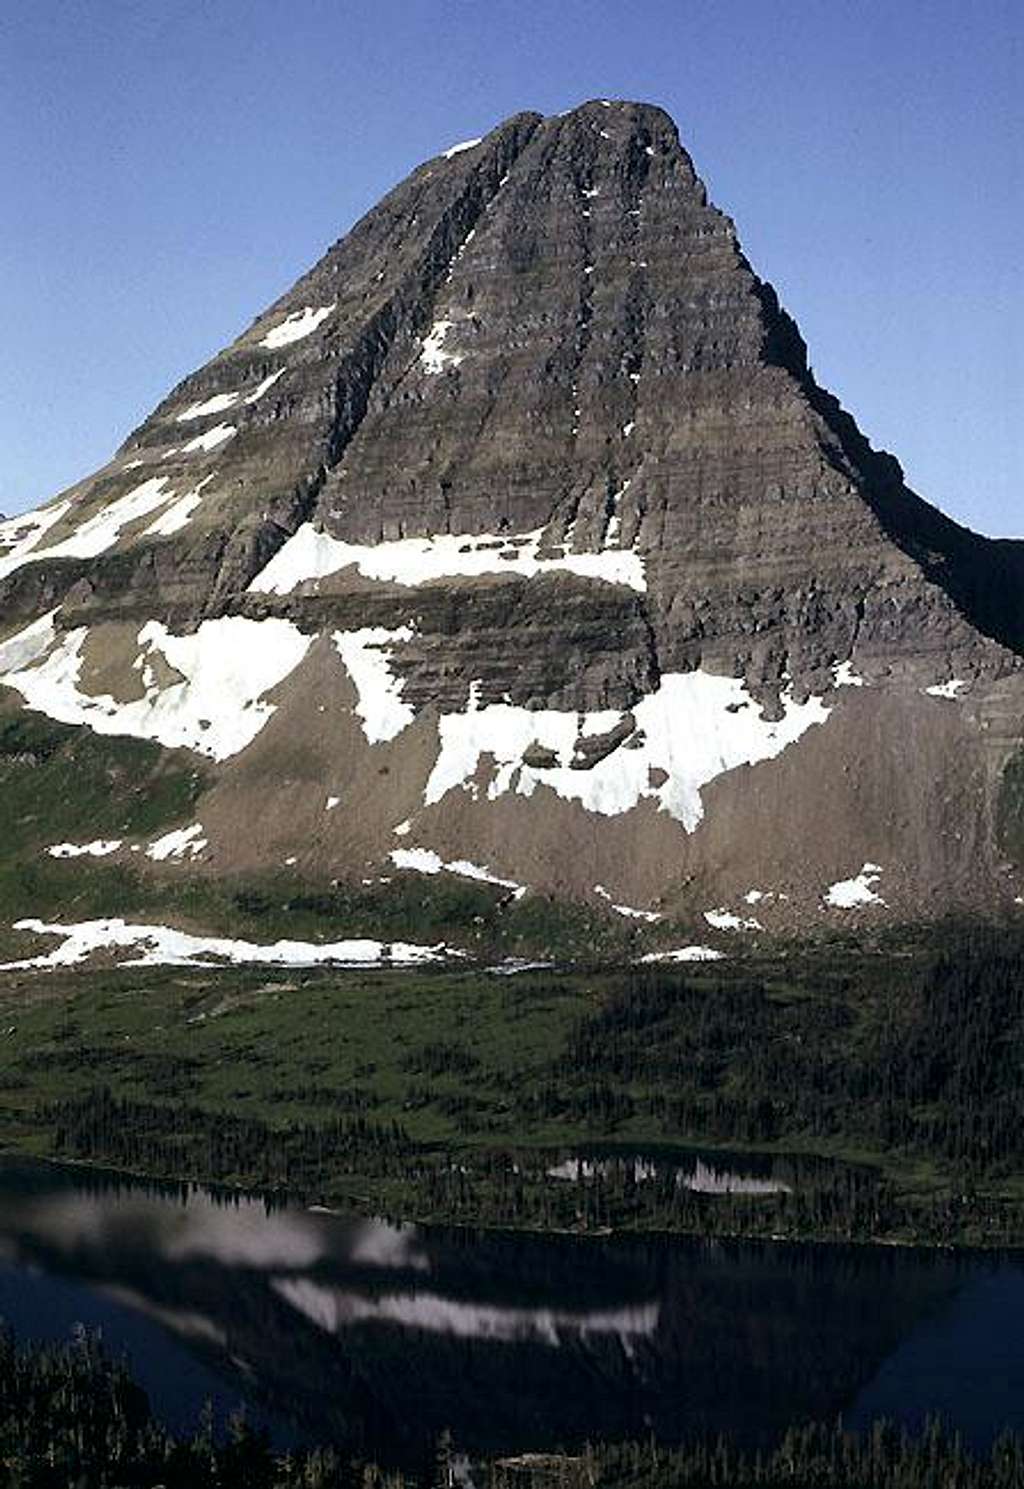 Bearhat Mountain, East Face
...